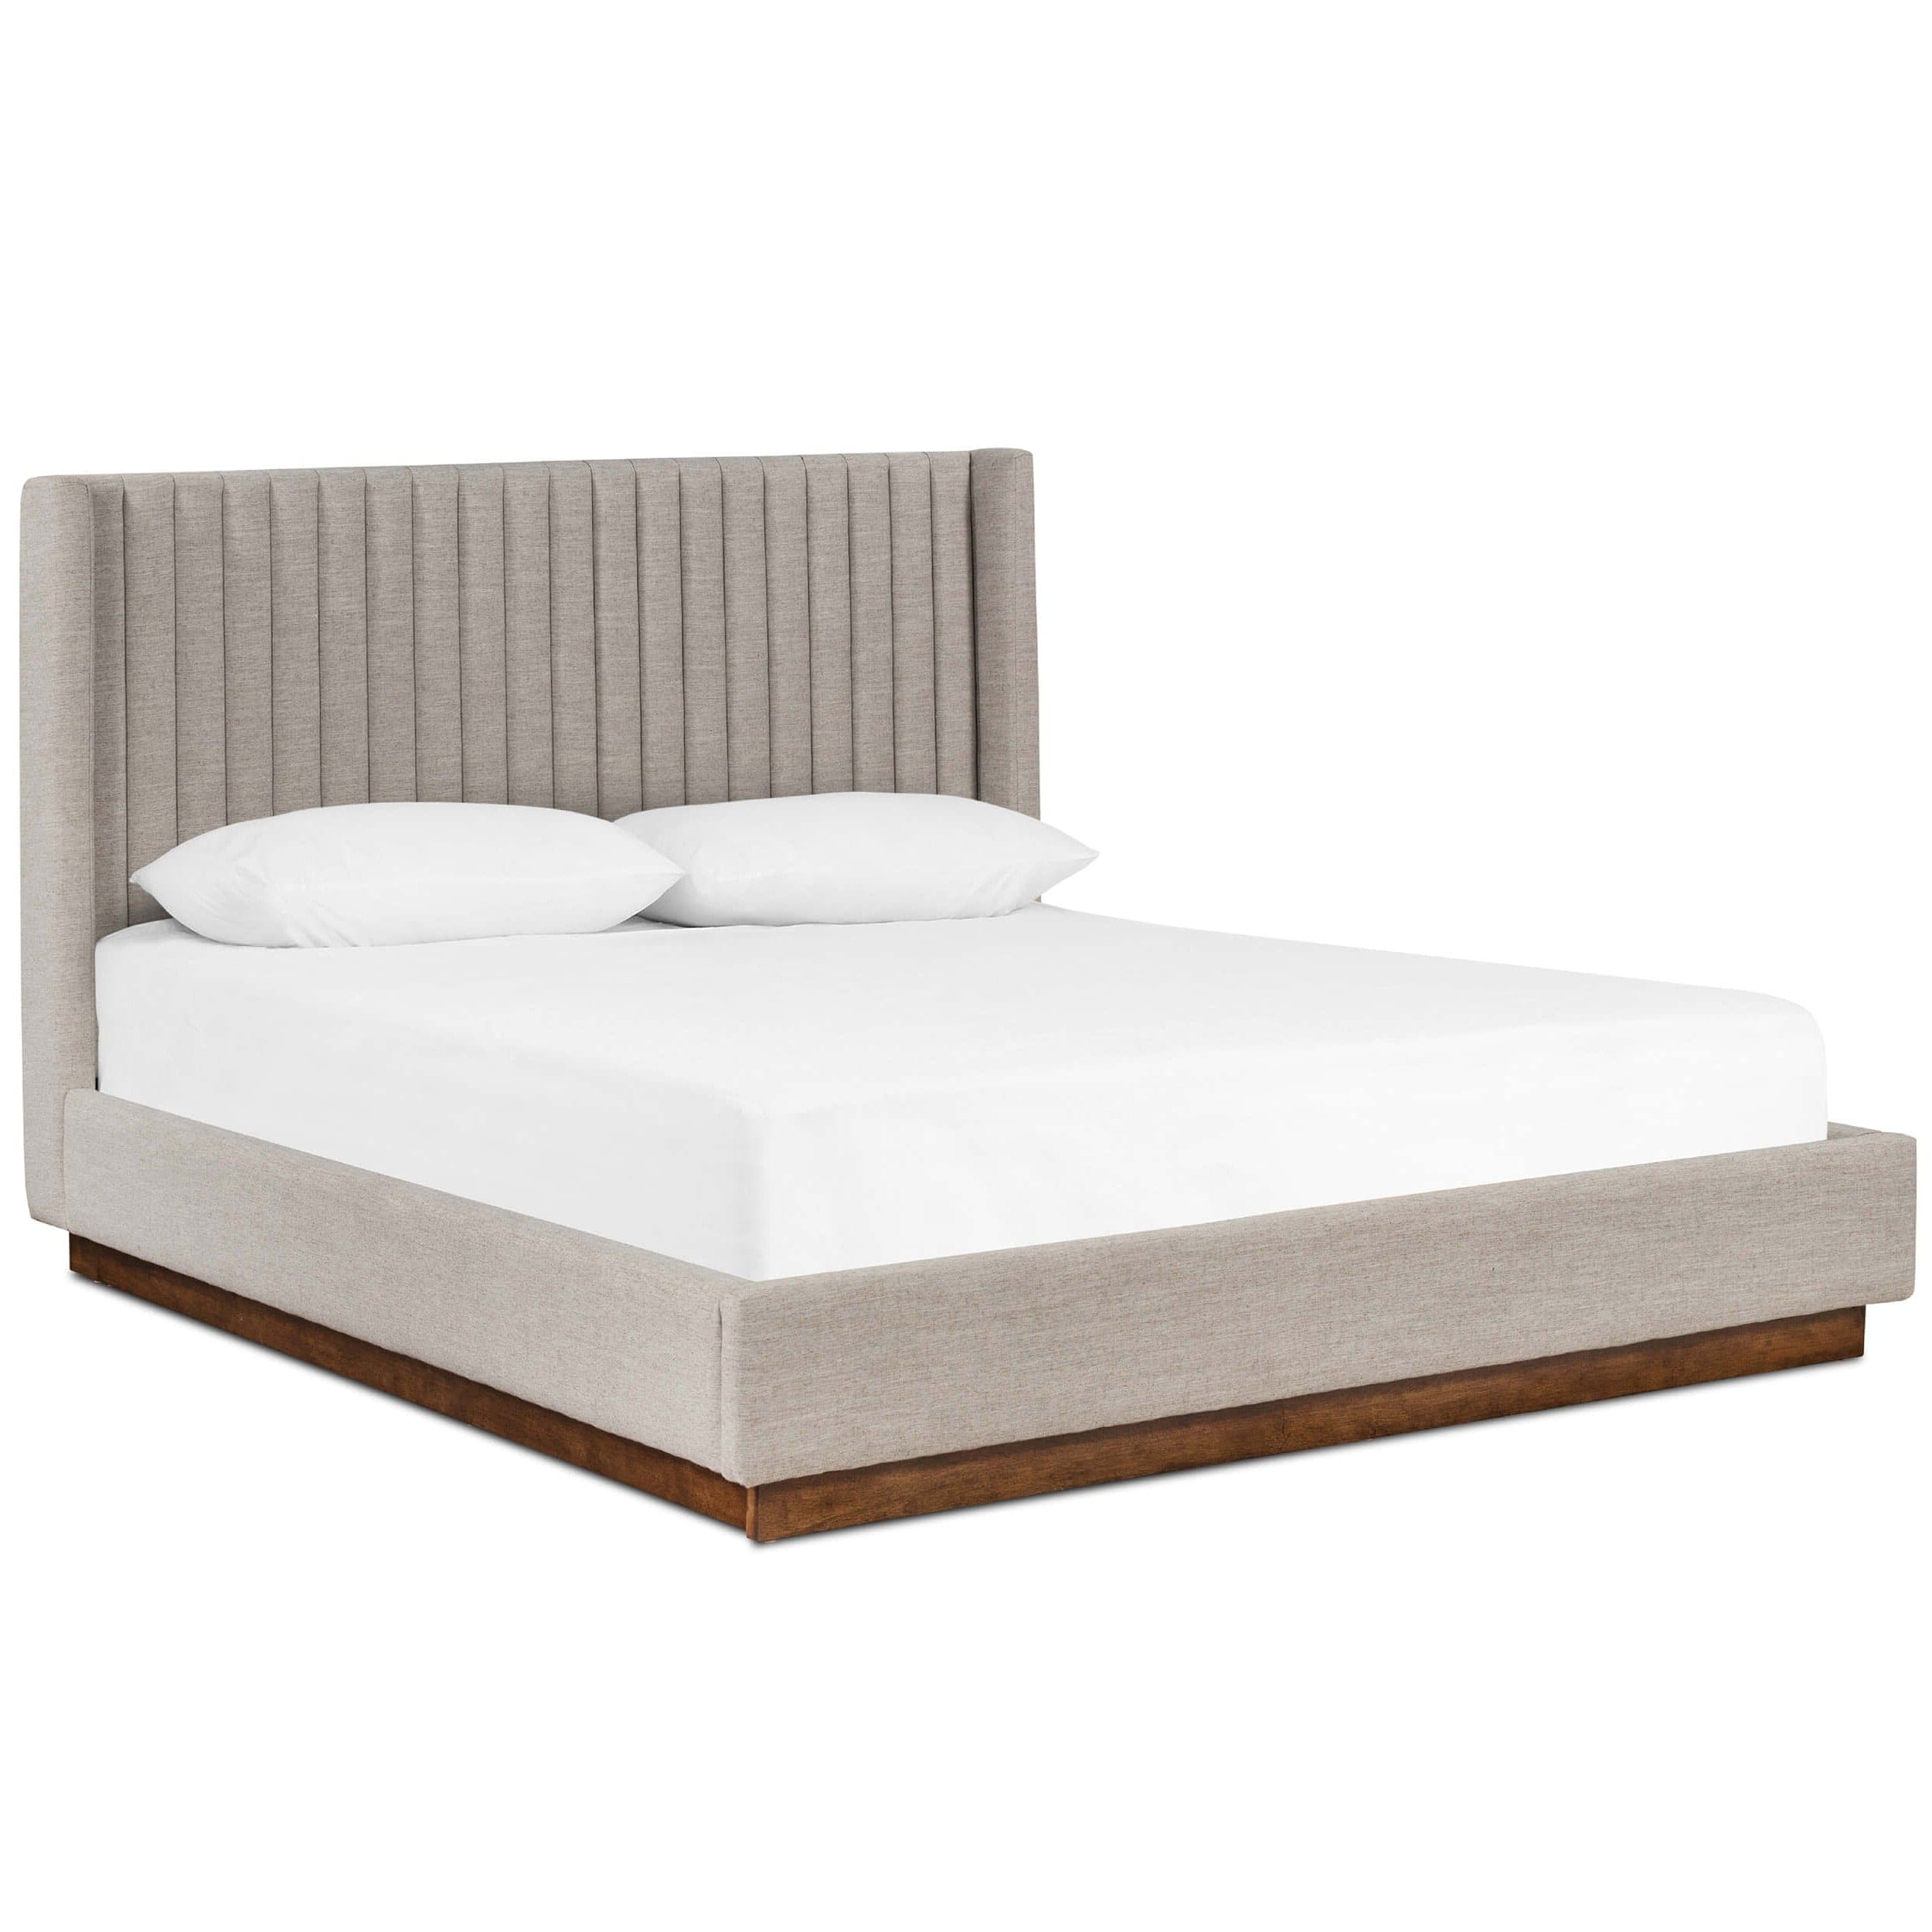 Image of Montgomery Bed, Savile Flannel